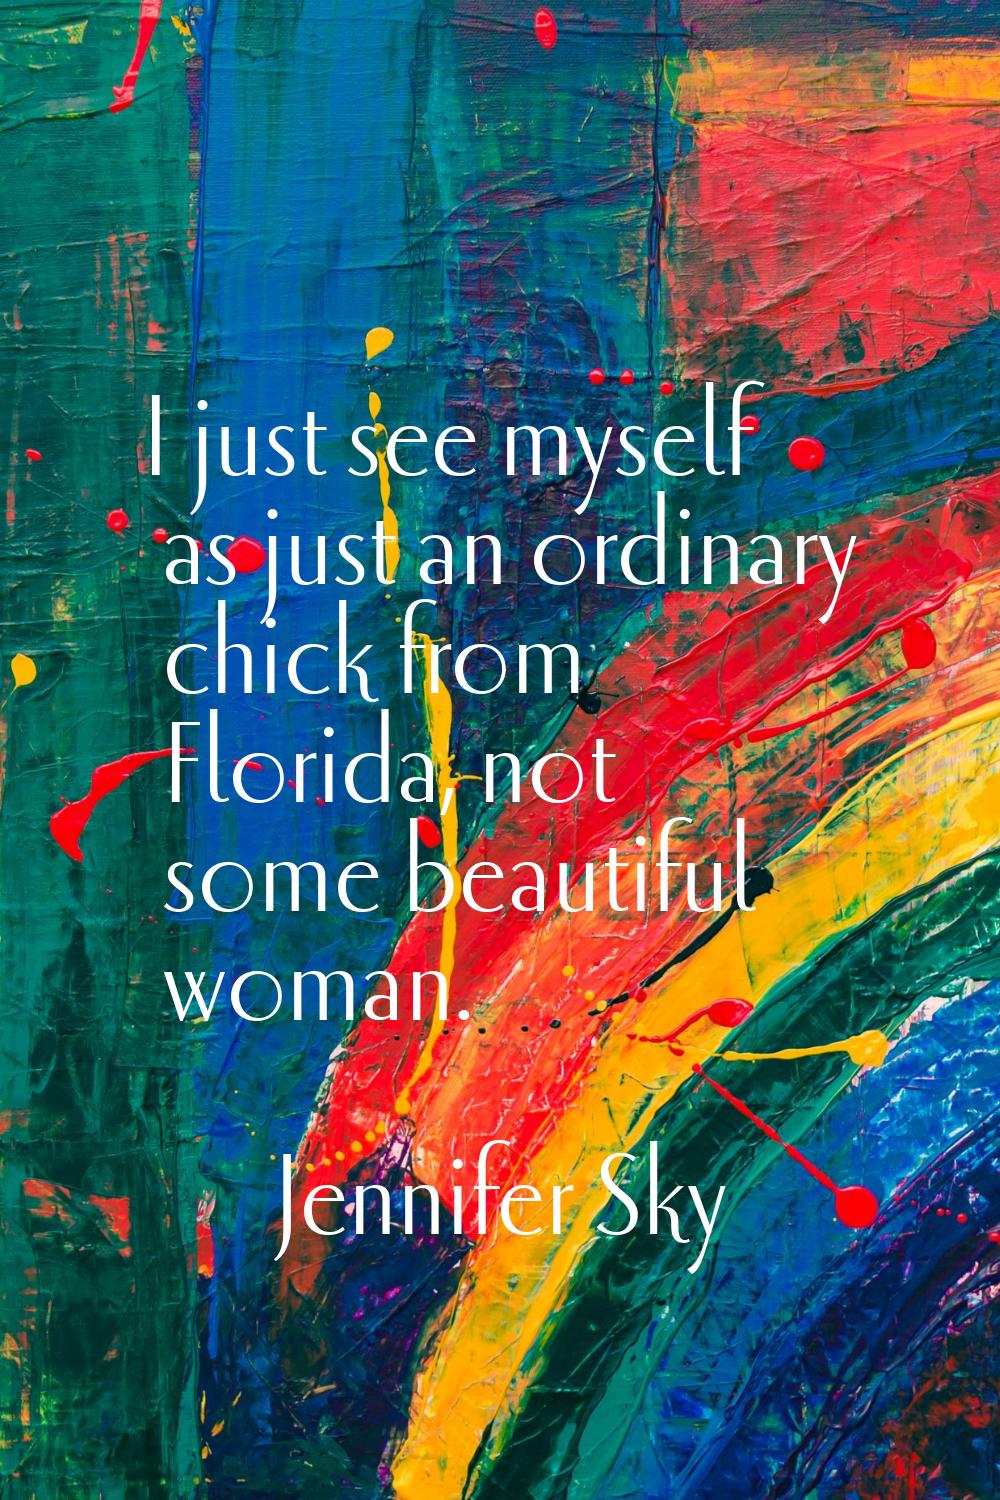 I just see myself as just an ordinary chick from Florida, not some beautiful woman.